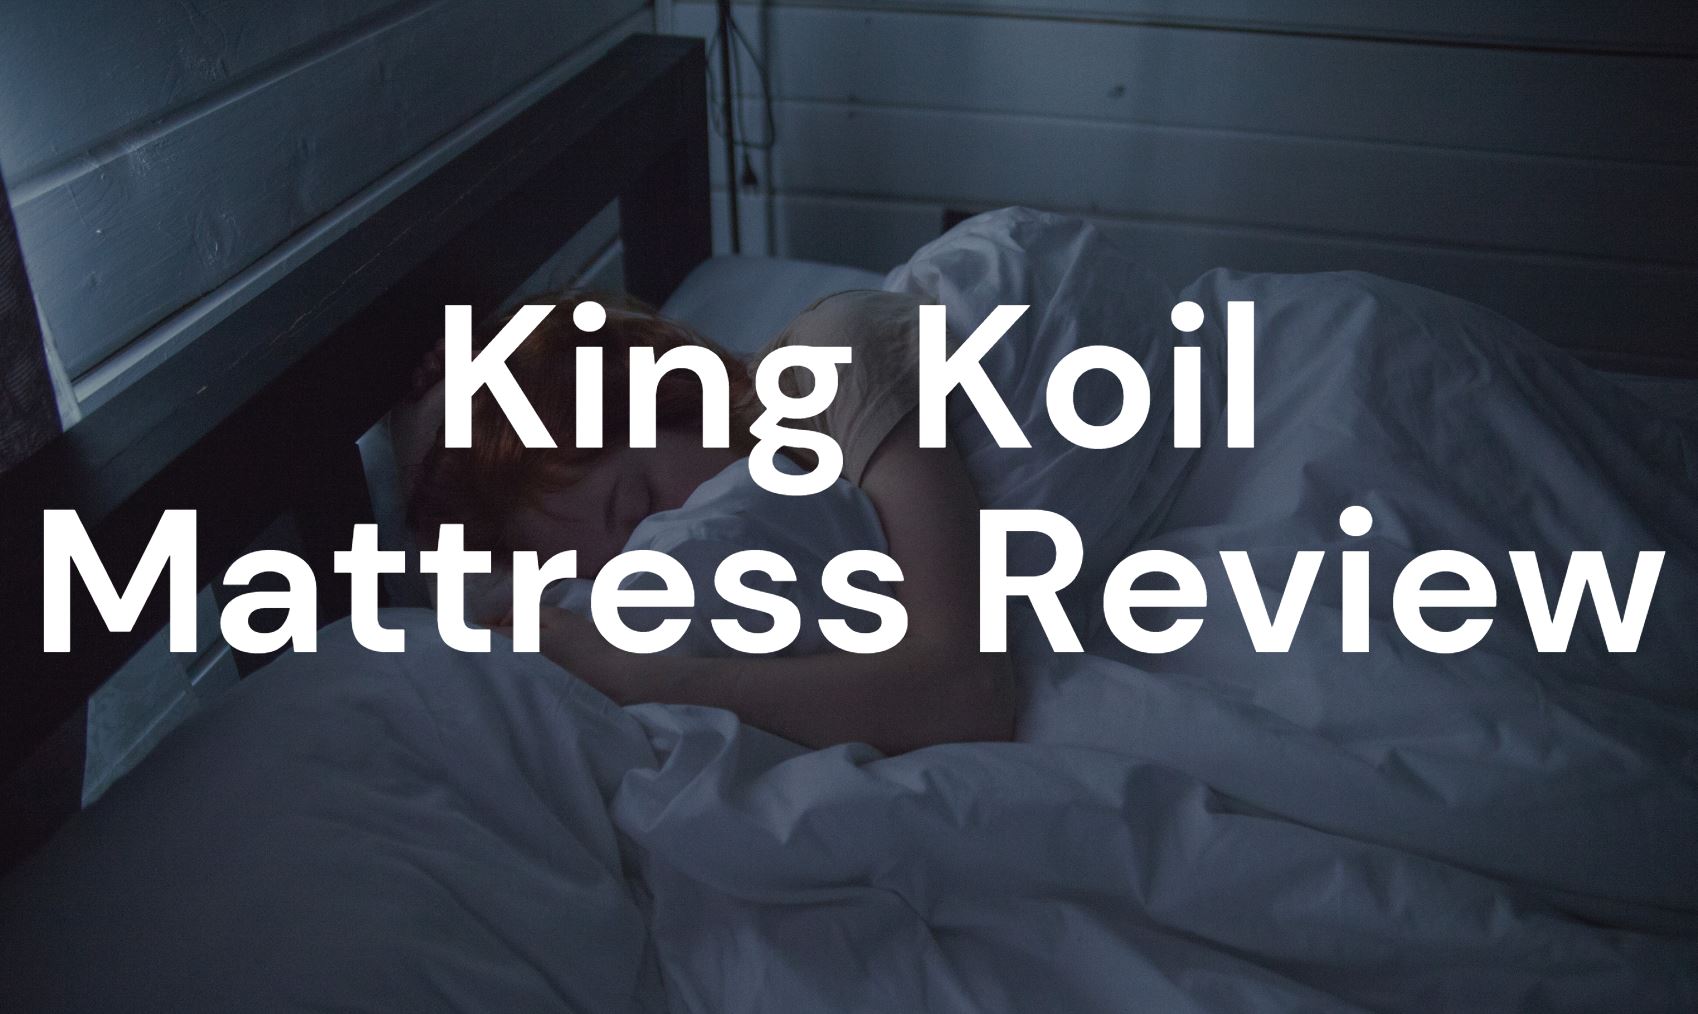 King Koil Mattress Review - Worth The Money?